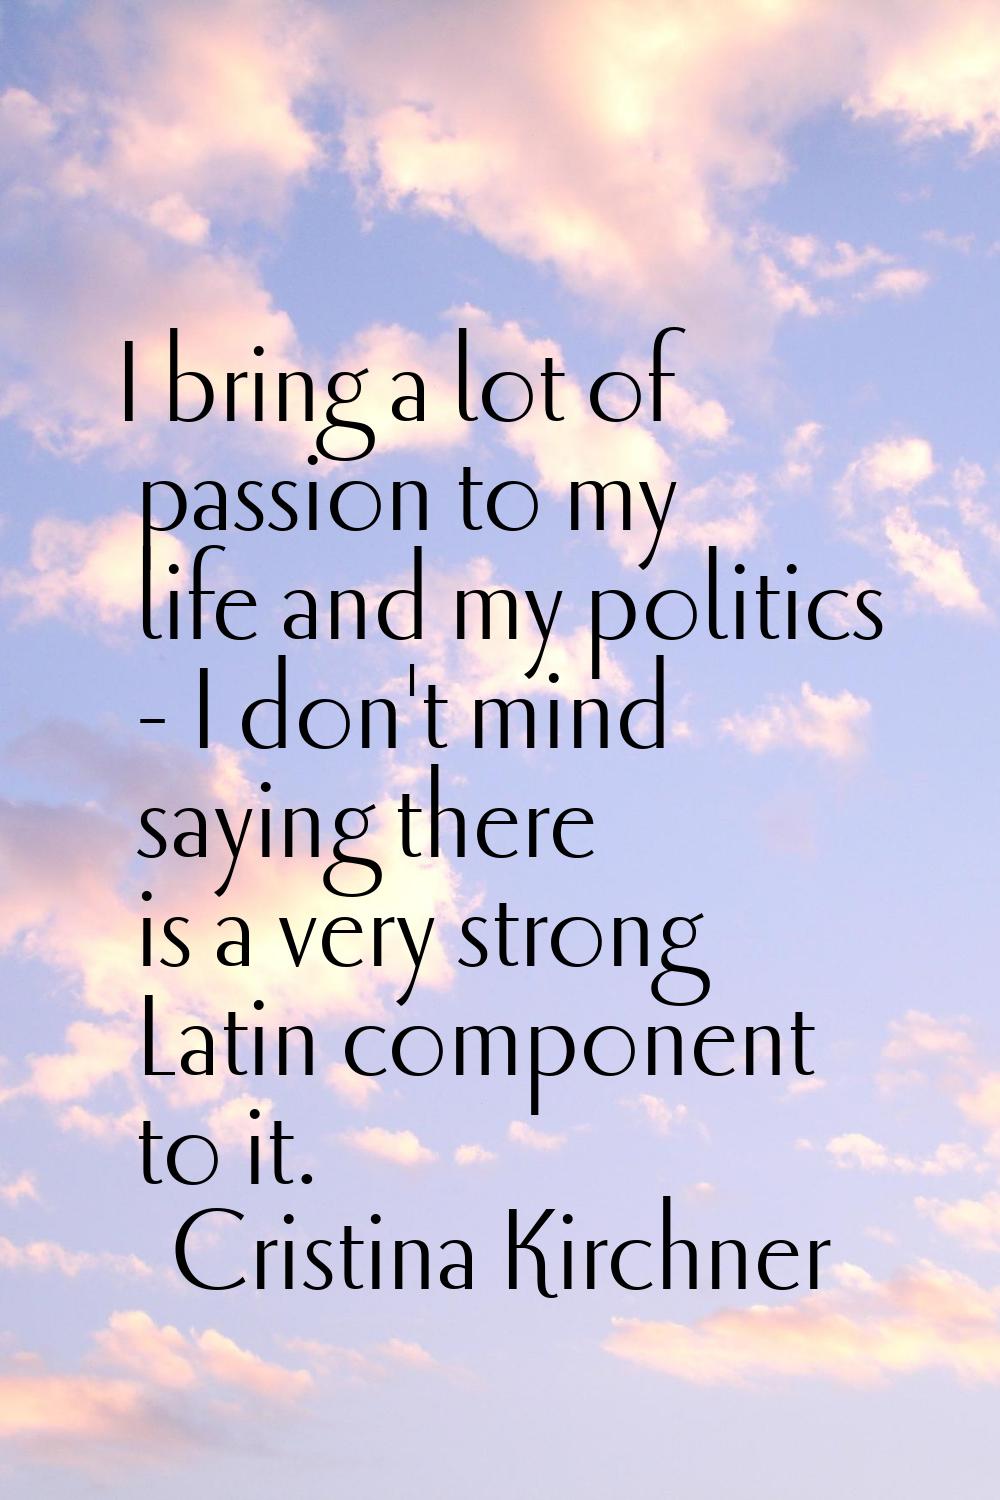 I bring a lot of passion to my life and my politics - I don't mind saying there is a very strong La